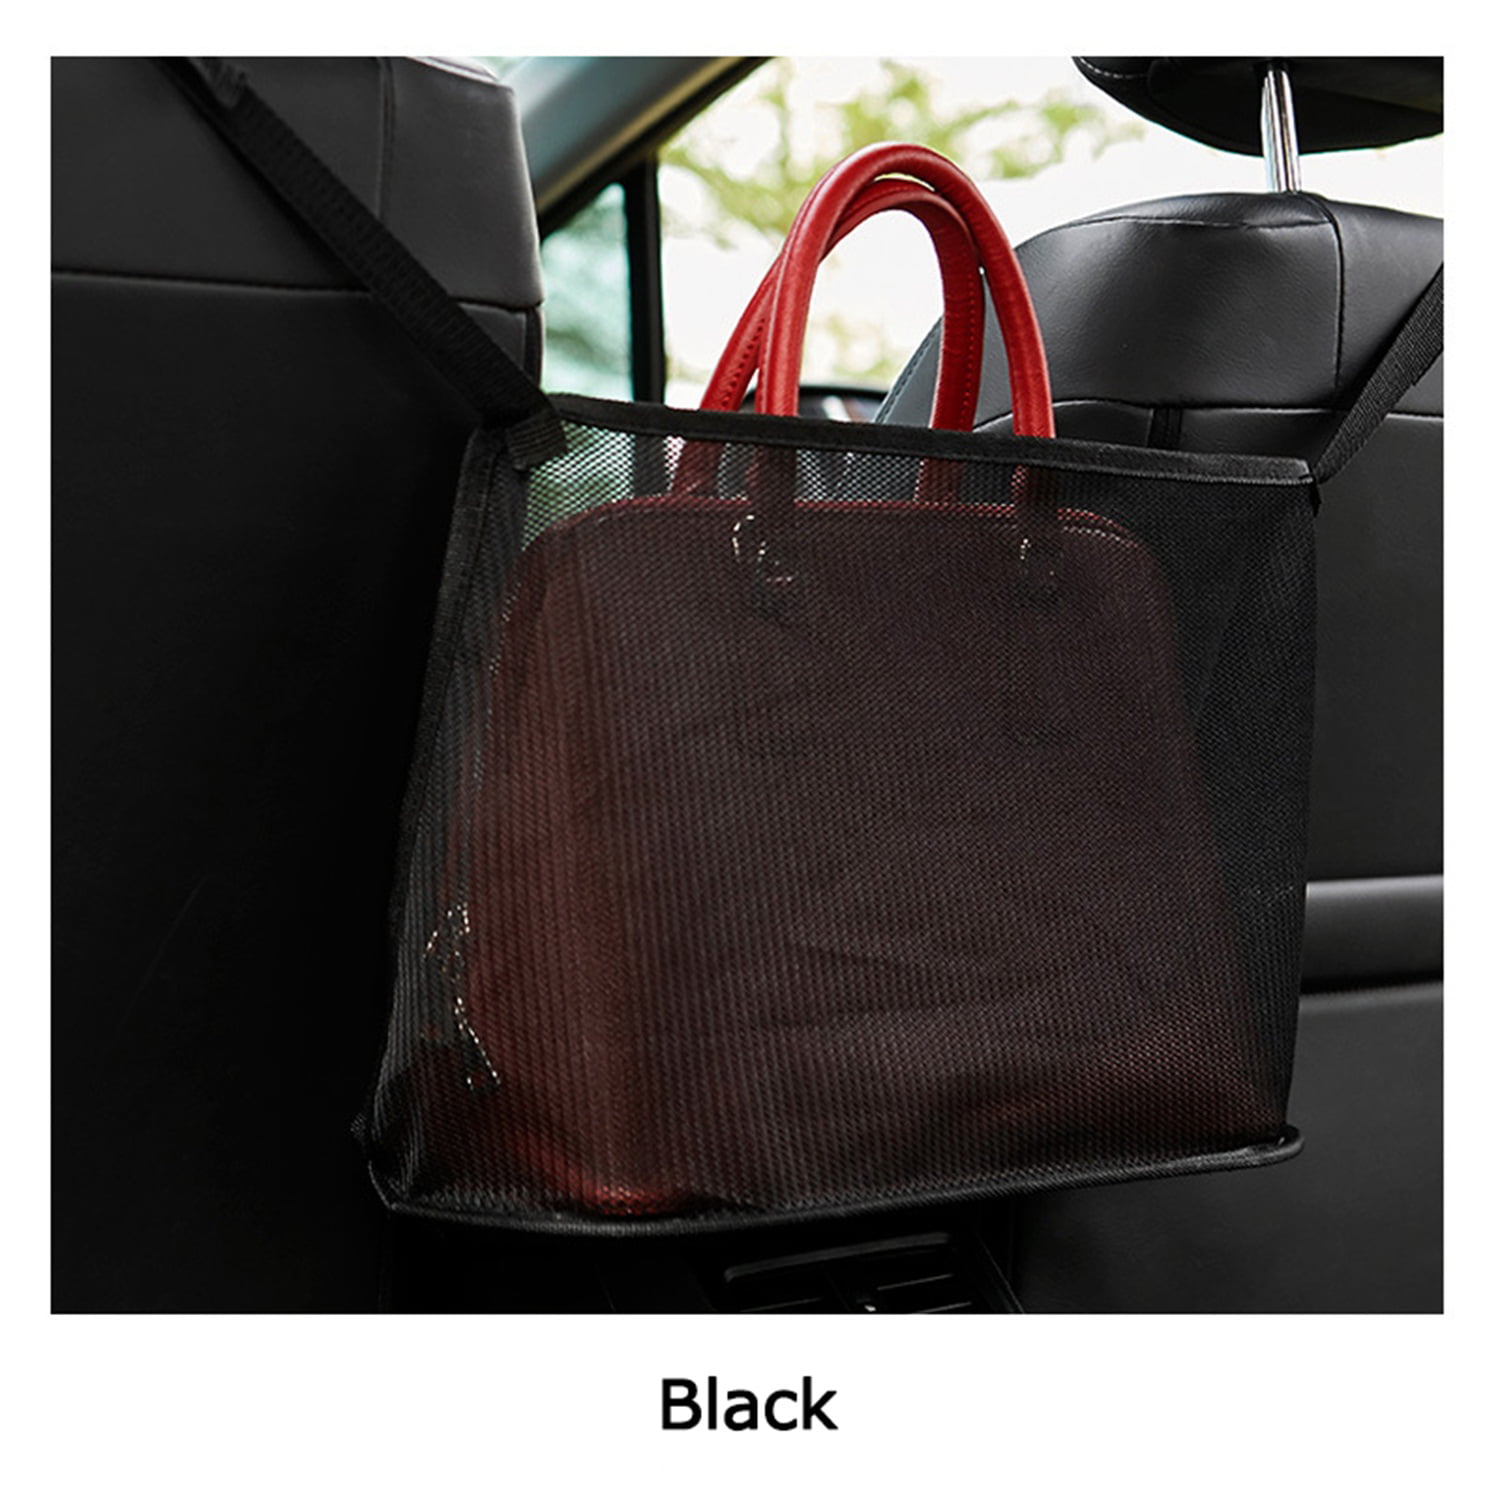 Handbag Holder Attaches to Headrest Handbag Holder for Car Car Net Pocket Handbag Holder Driver Storage Netting Pouch Car Hooks for Purses and Bags Front Seat Black 